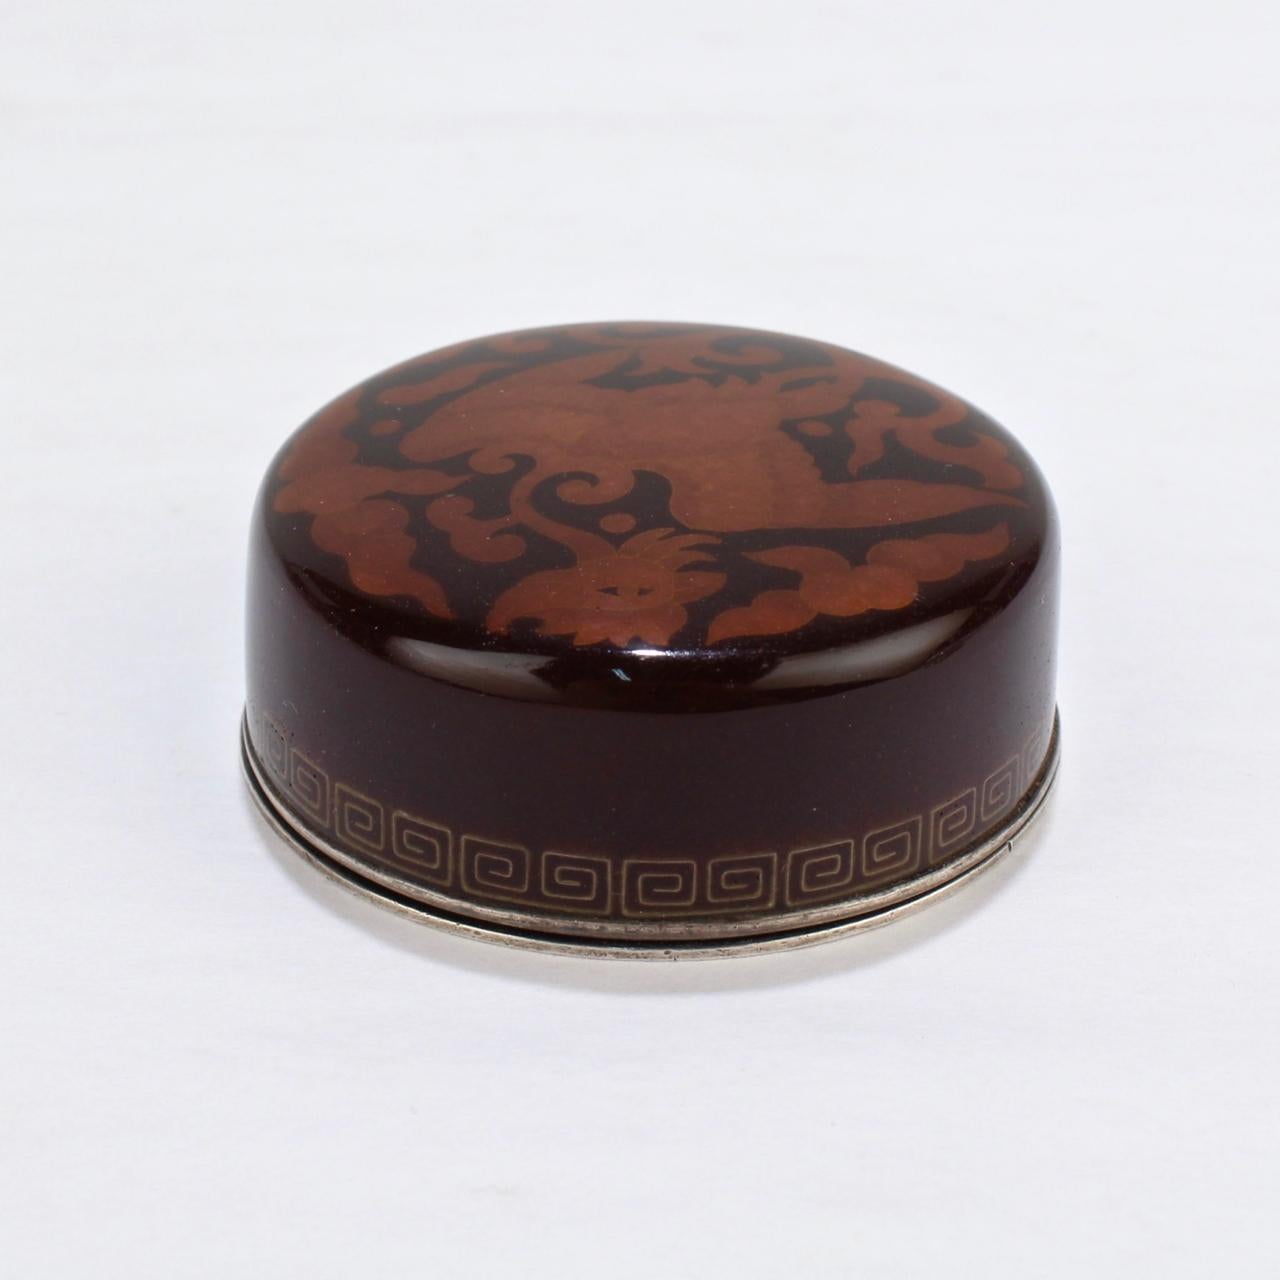 Signed Japanese Cloisonné Enamel Small Round Box with a Phoenix by Inaba 2